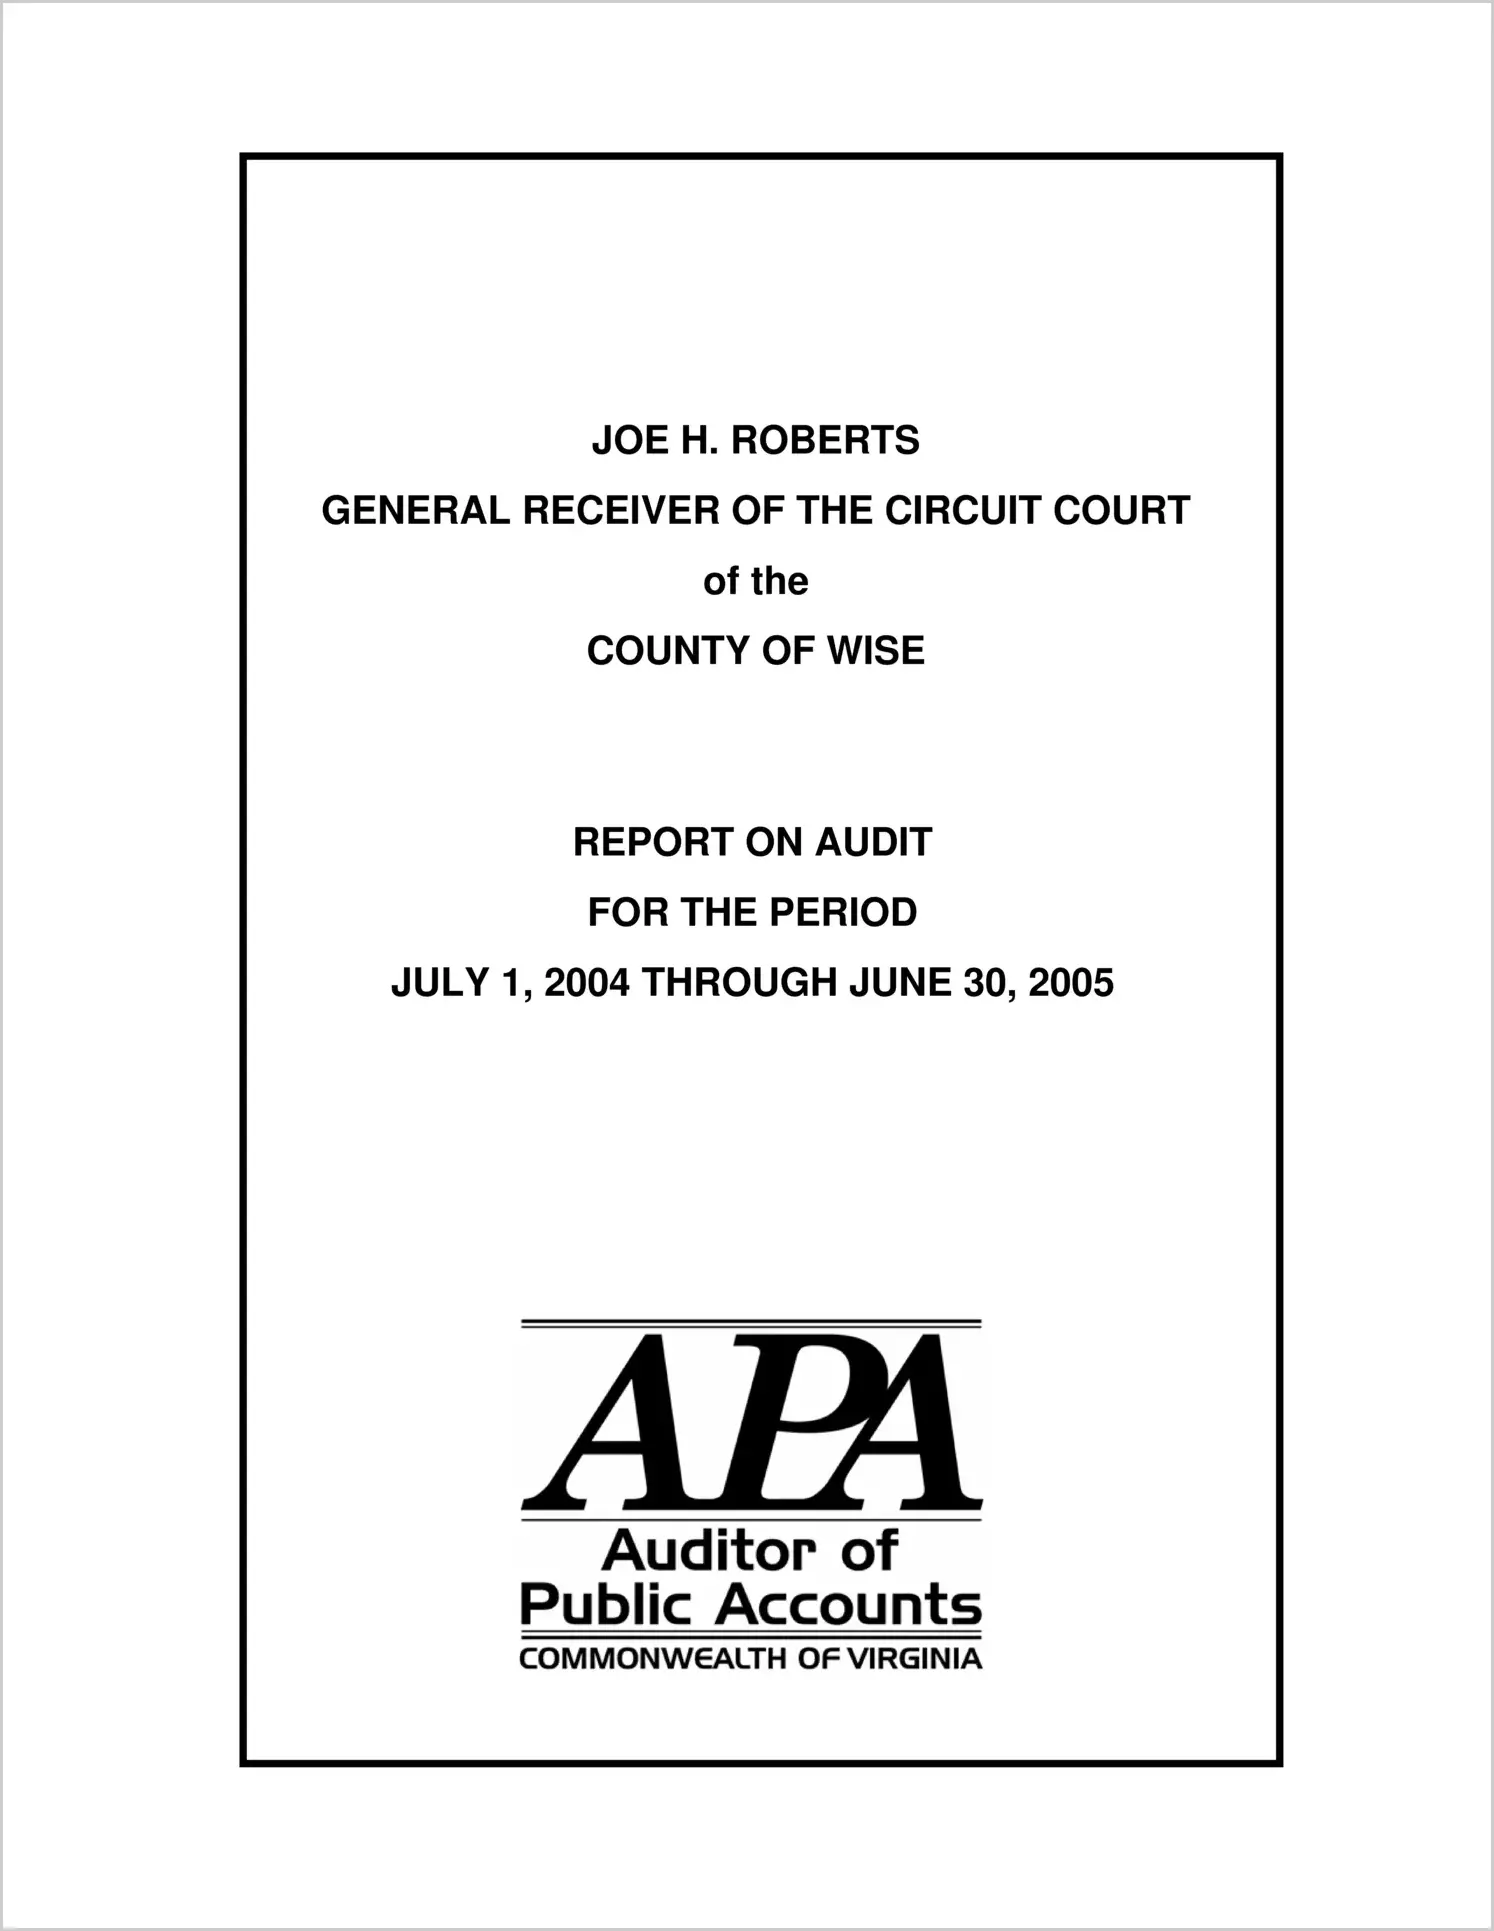 General Receiver of the Circuit Court of the County of Wise for the period July 1, 2004 through June 30, 2005